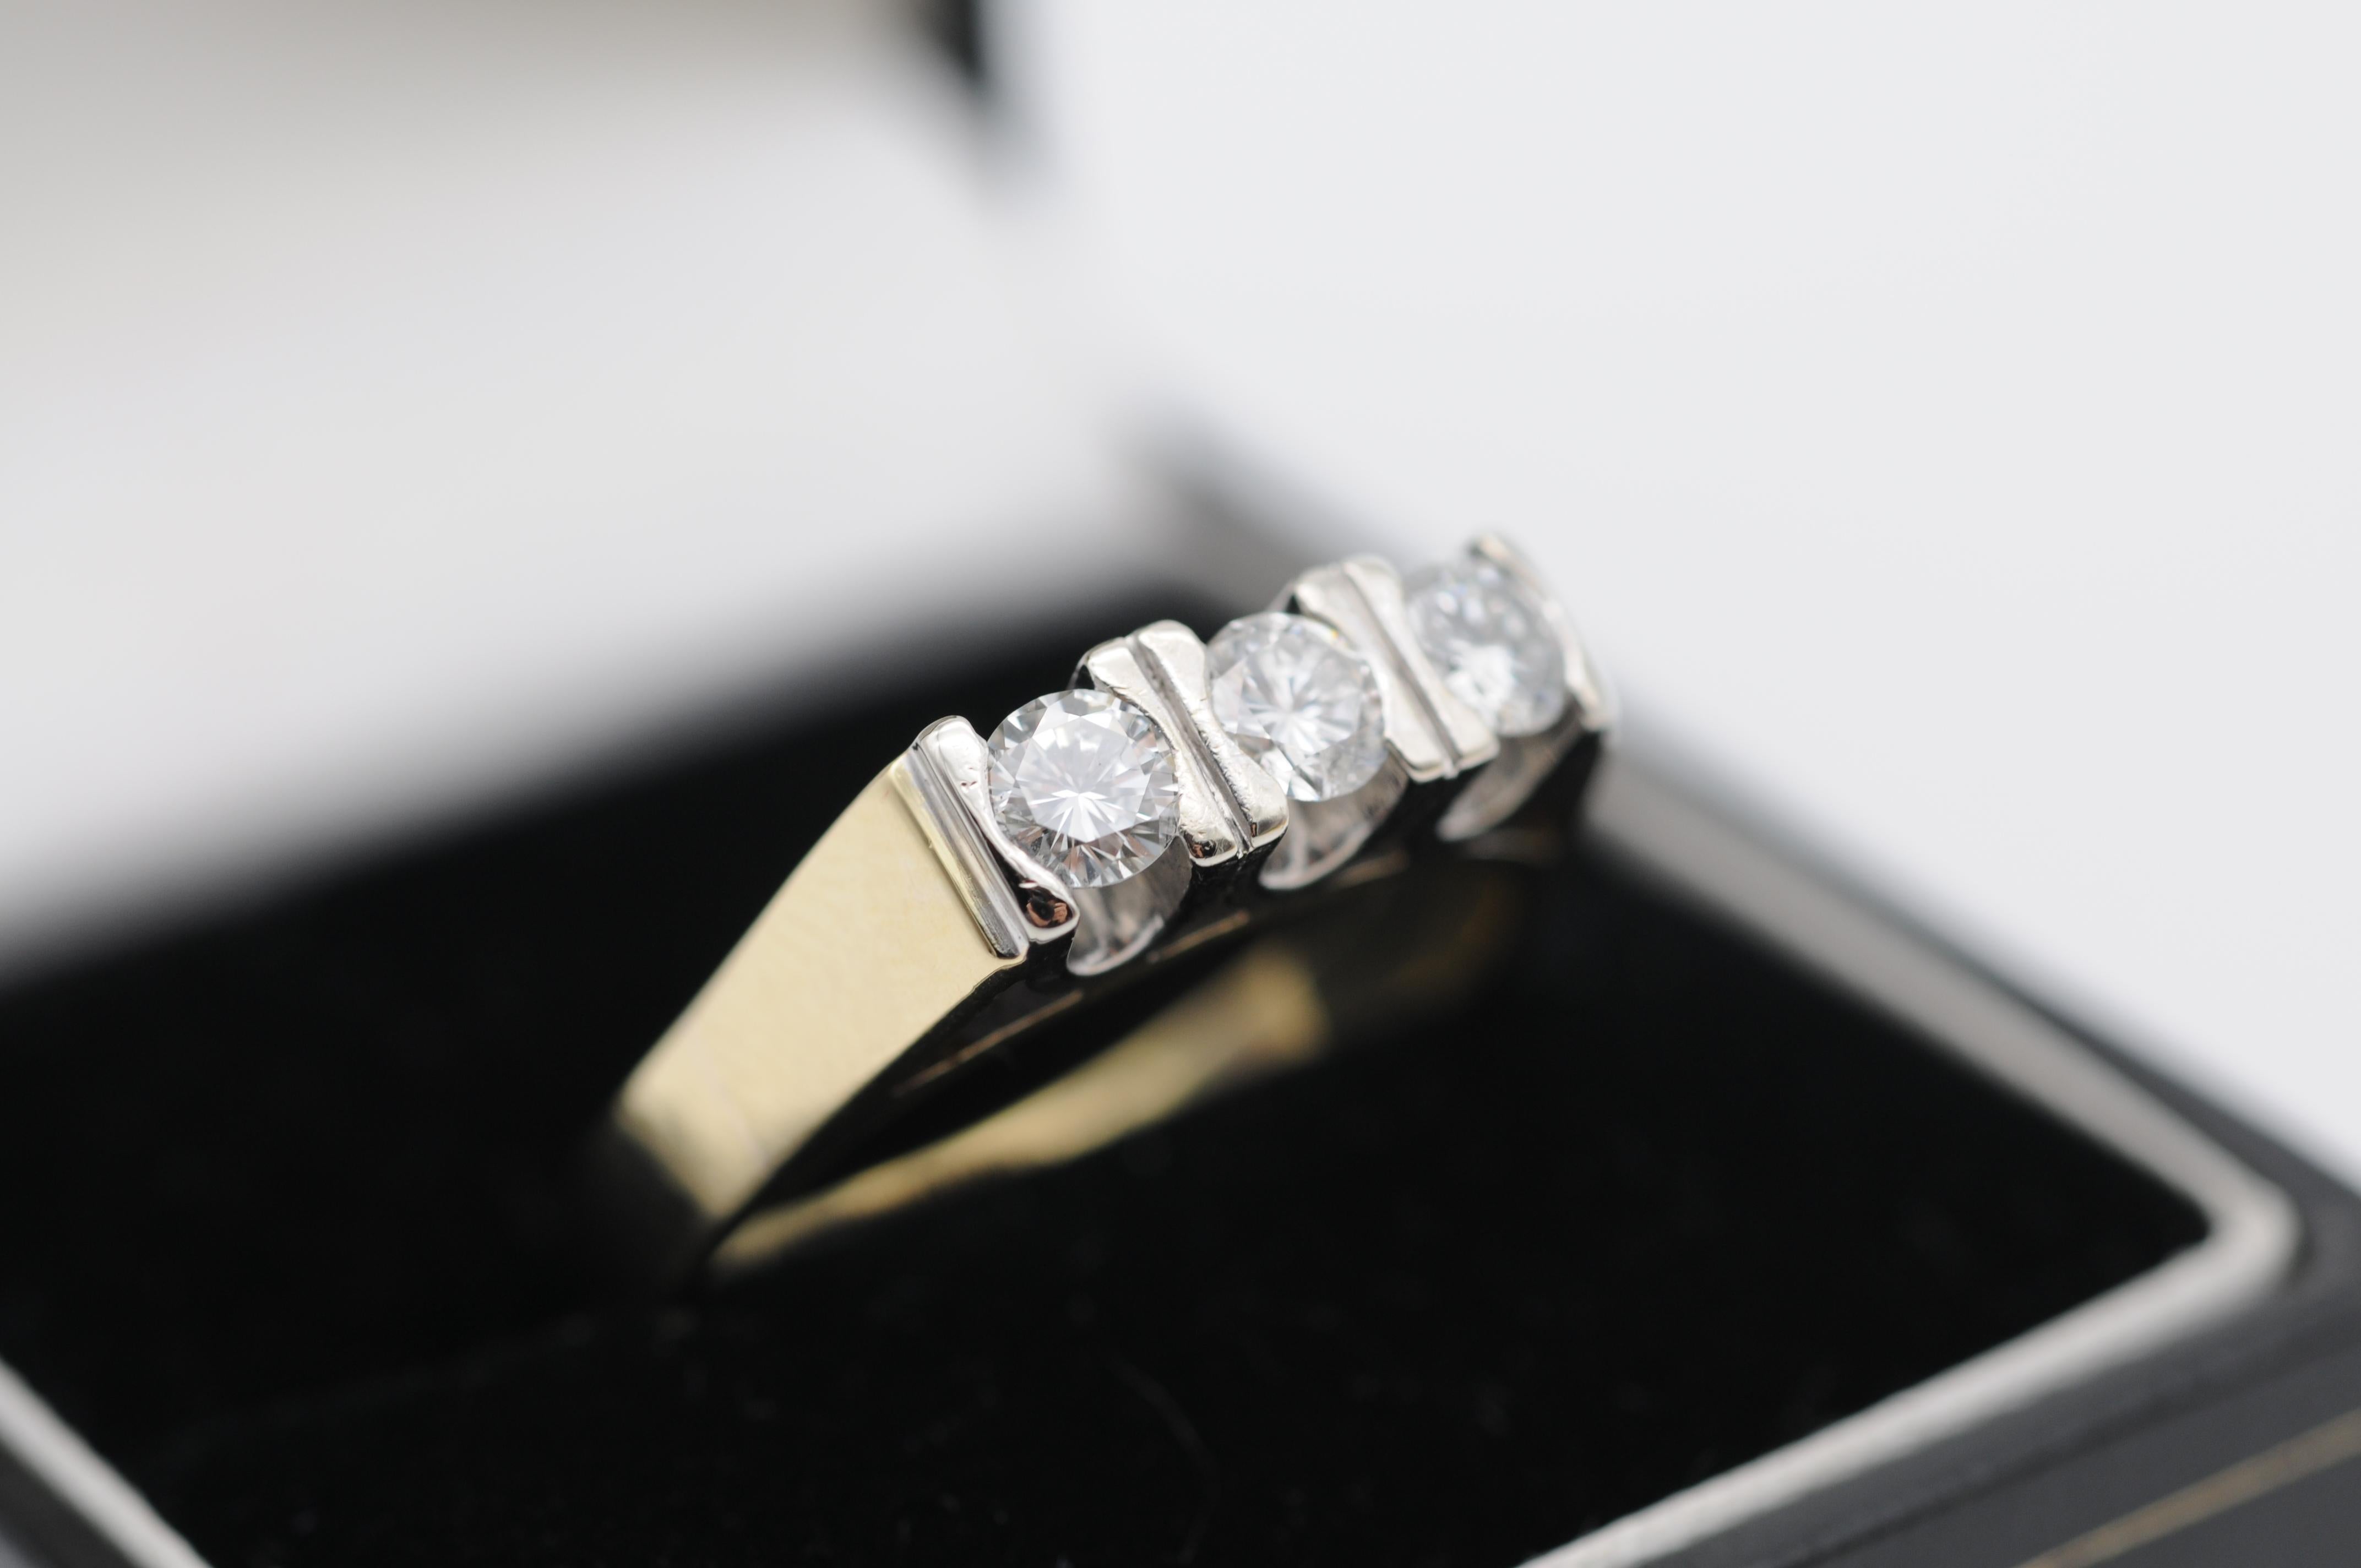 This 14k gold diamond band ring is a classic and timeless piece of jewelry that exudes elegance and sophistication. The ring features three dazzling diamonds that sparkle with brilliance and fire, with a total carat weight of approximately 0.60